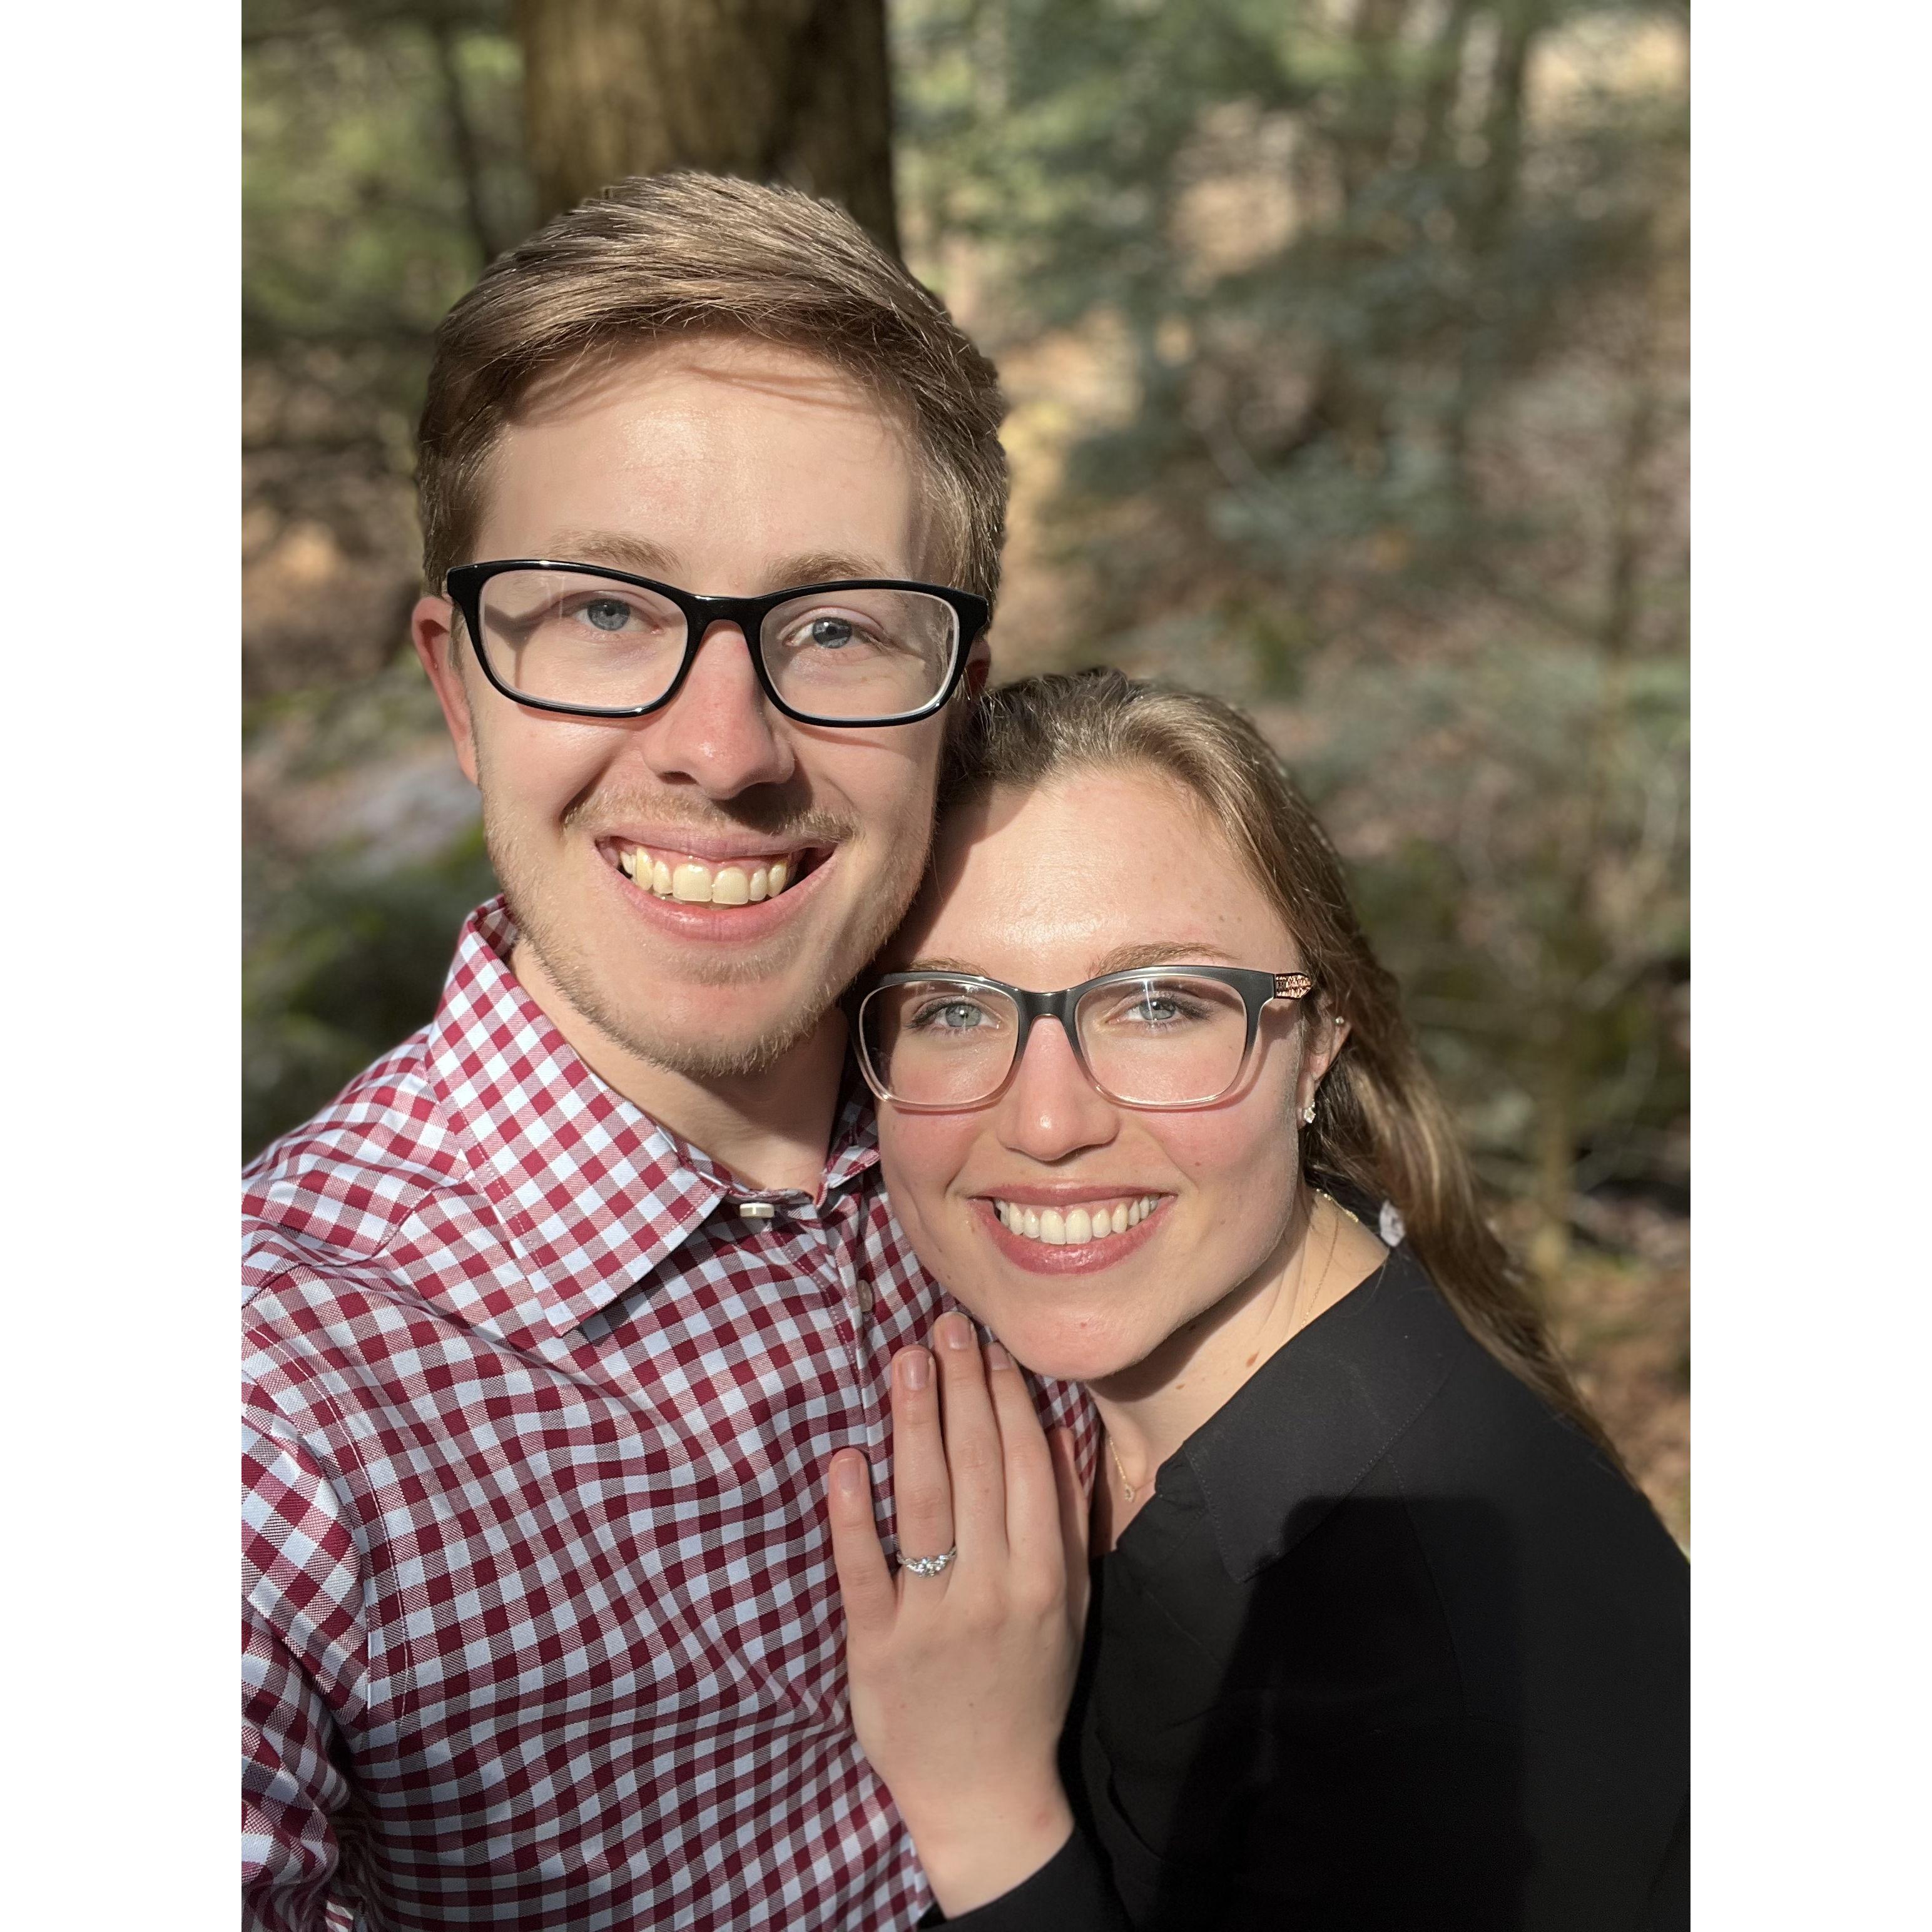 In the woods of Underhill, Vermont, where we got engaged